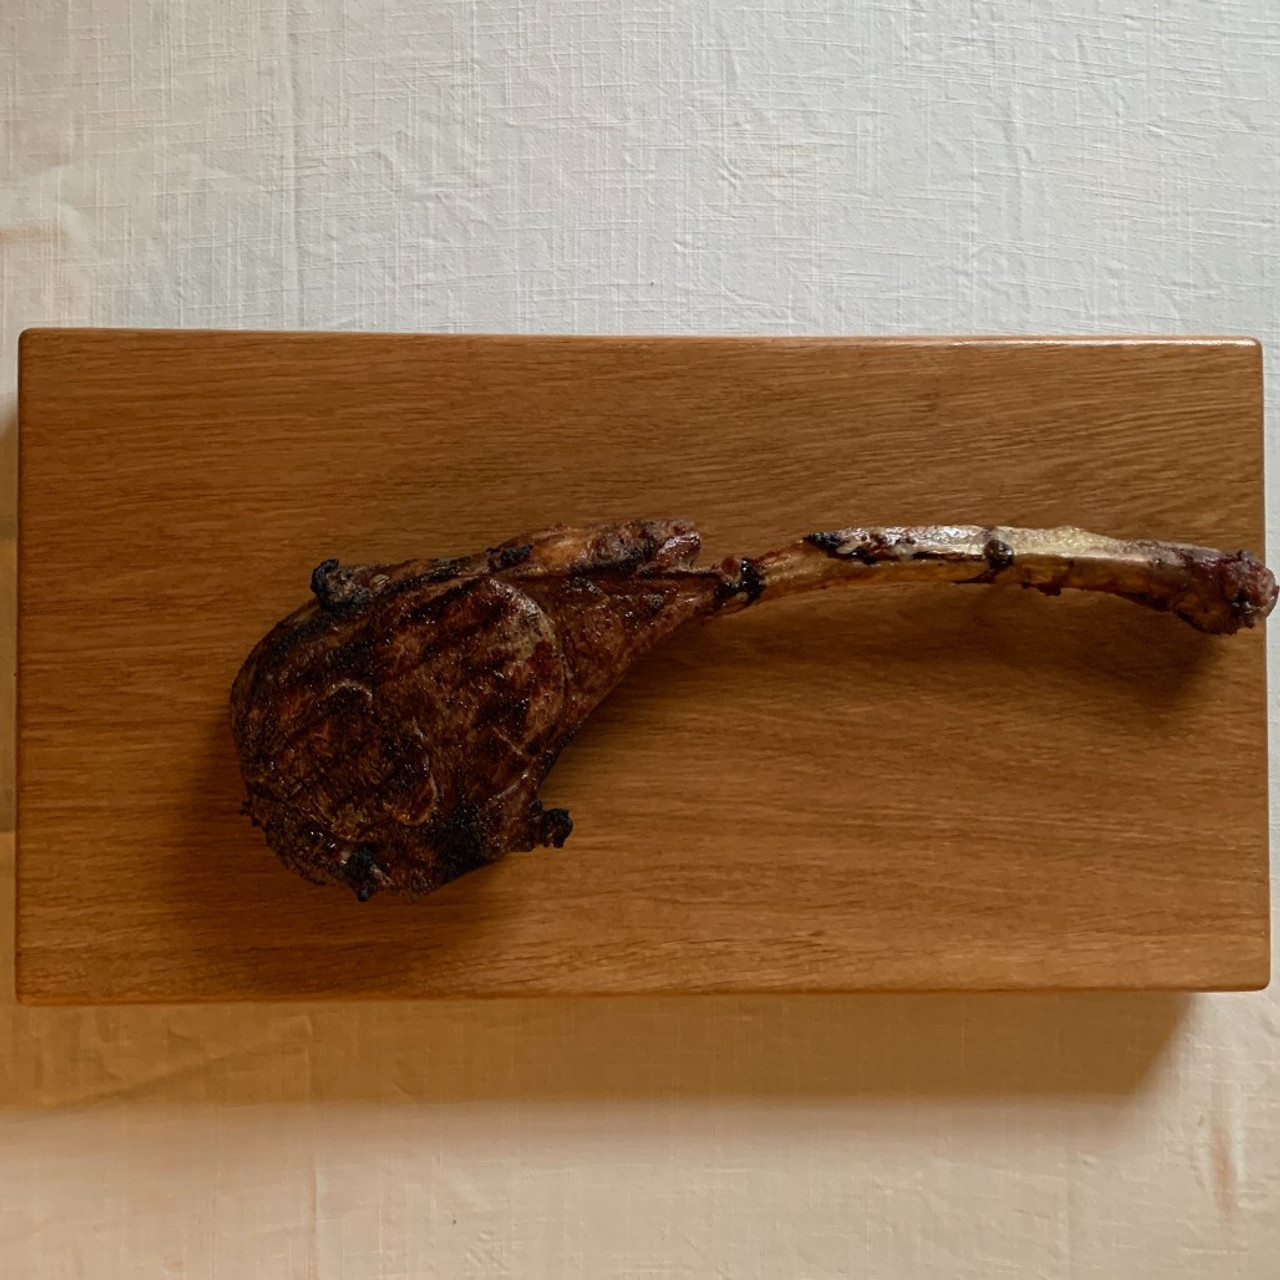 https://cdn11.bigcommerce.com/s-1vey7r6116/images/stencil/1280x1280/products/124/513/large-white-oak-cutting-board-by-Treeboard-tomahawk-steak-above-1280__45402.1686530952.jpg?c=1